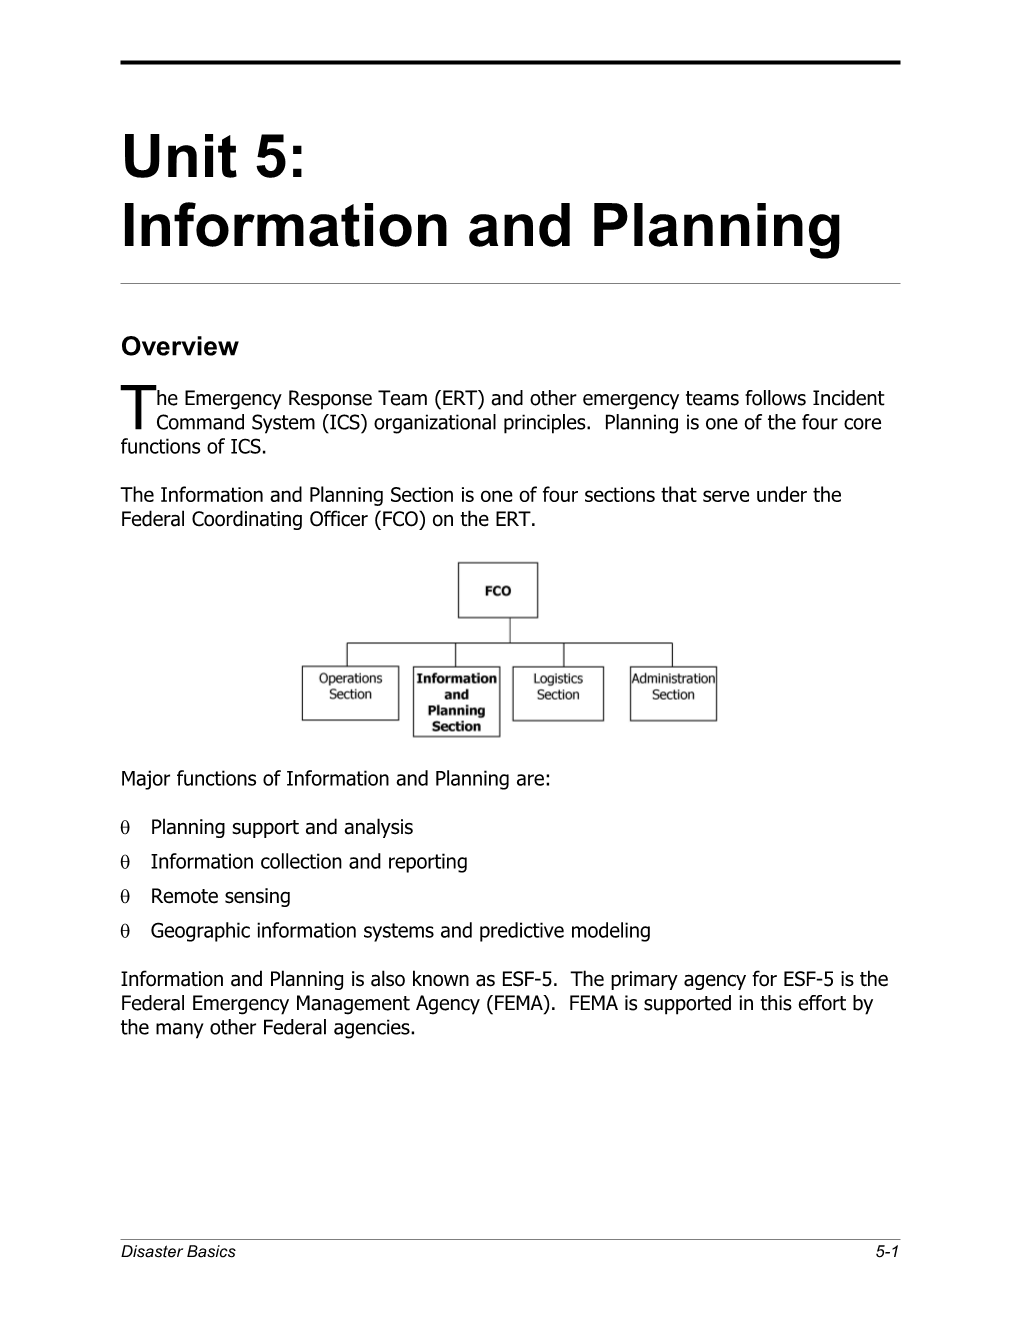 Information and Planning